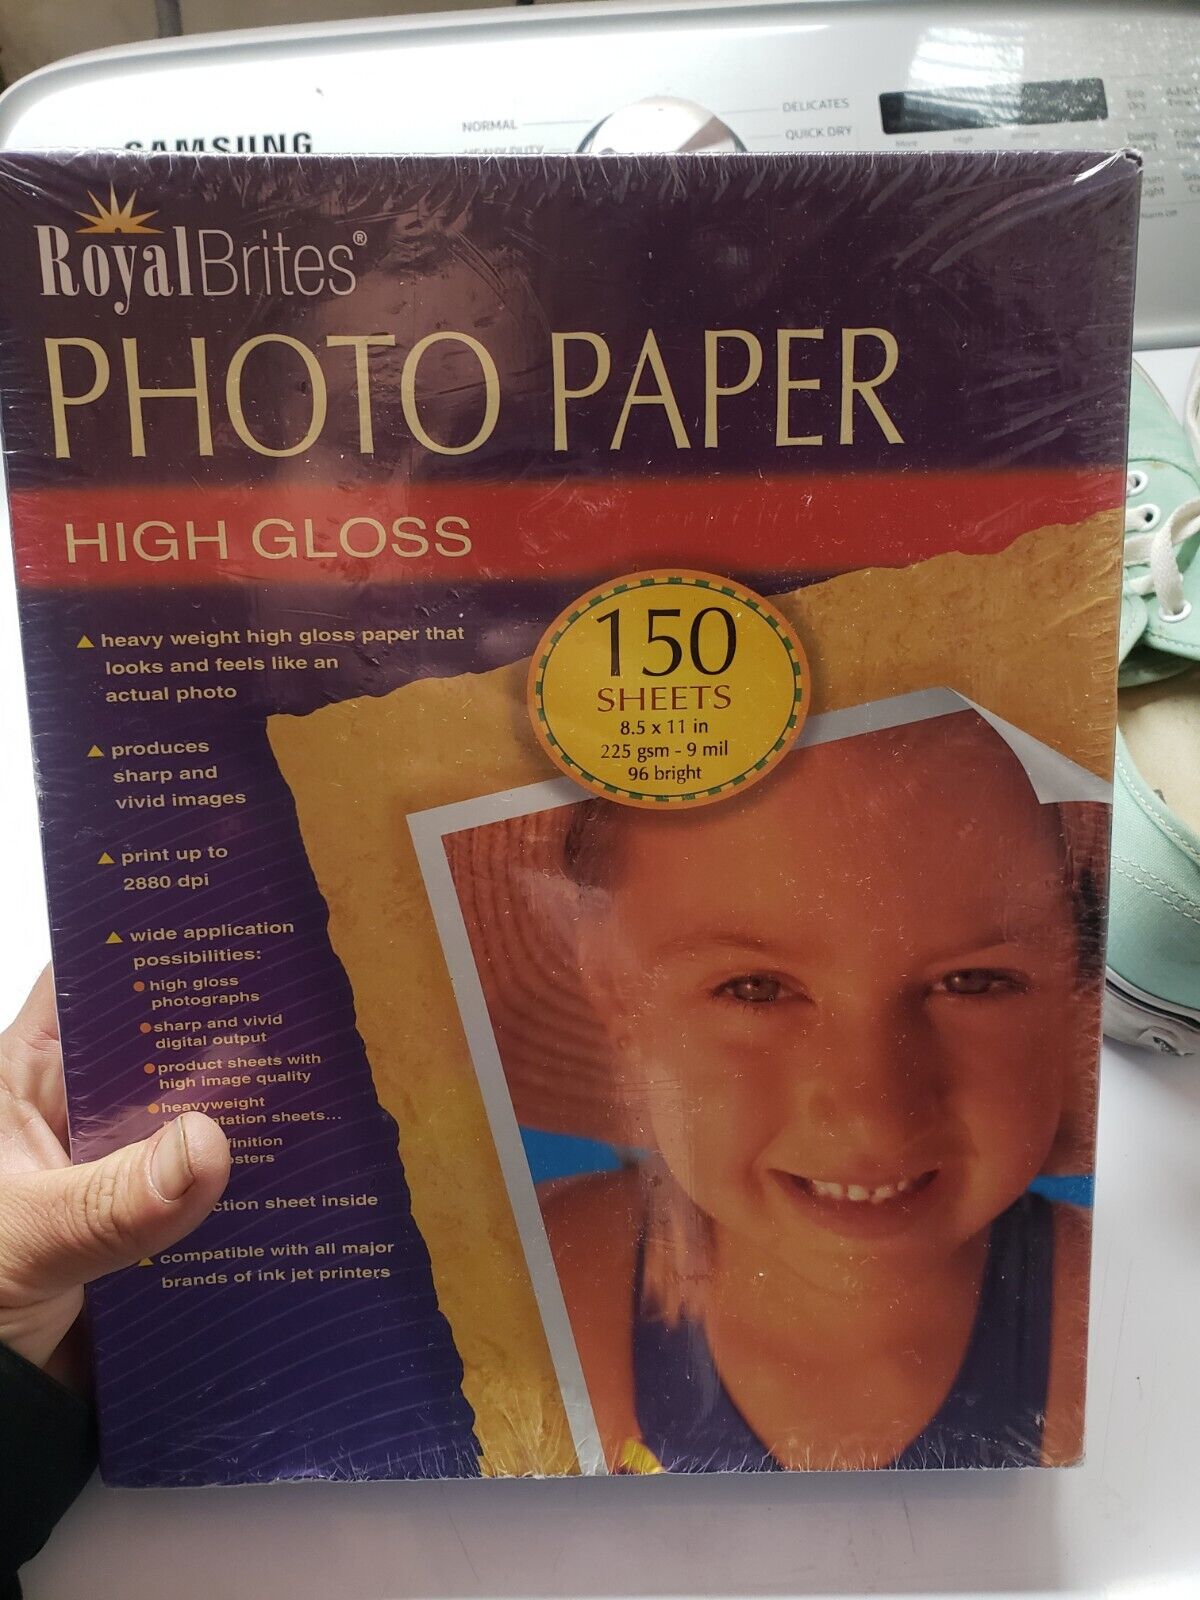 NEW Royal Brites Photo Paper High Gloss 150 Sheets , 8.5 × 11 in. 9 Mil